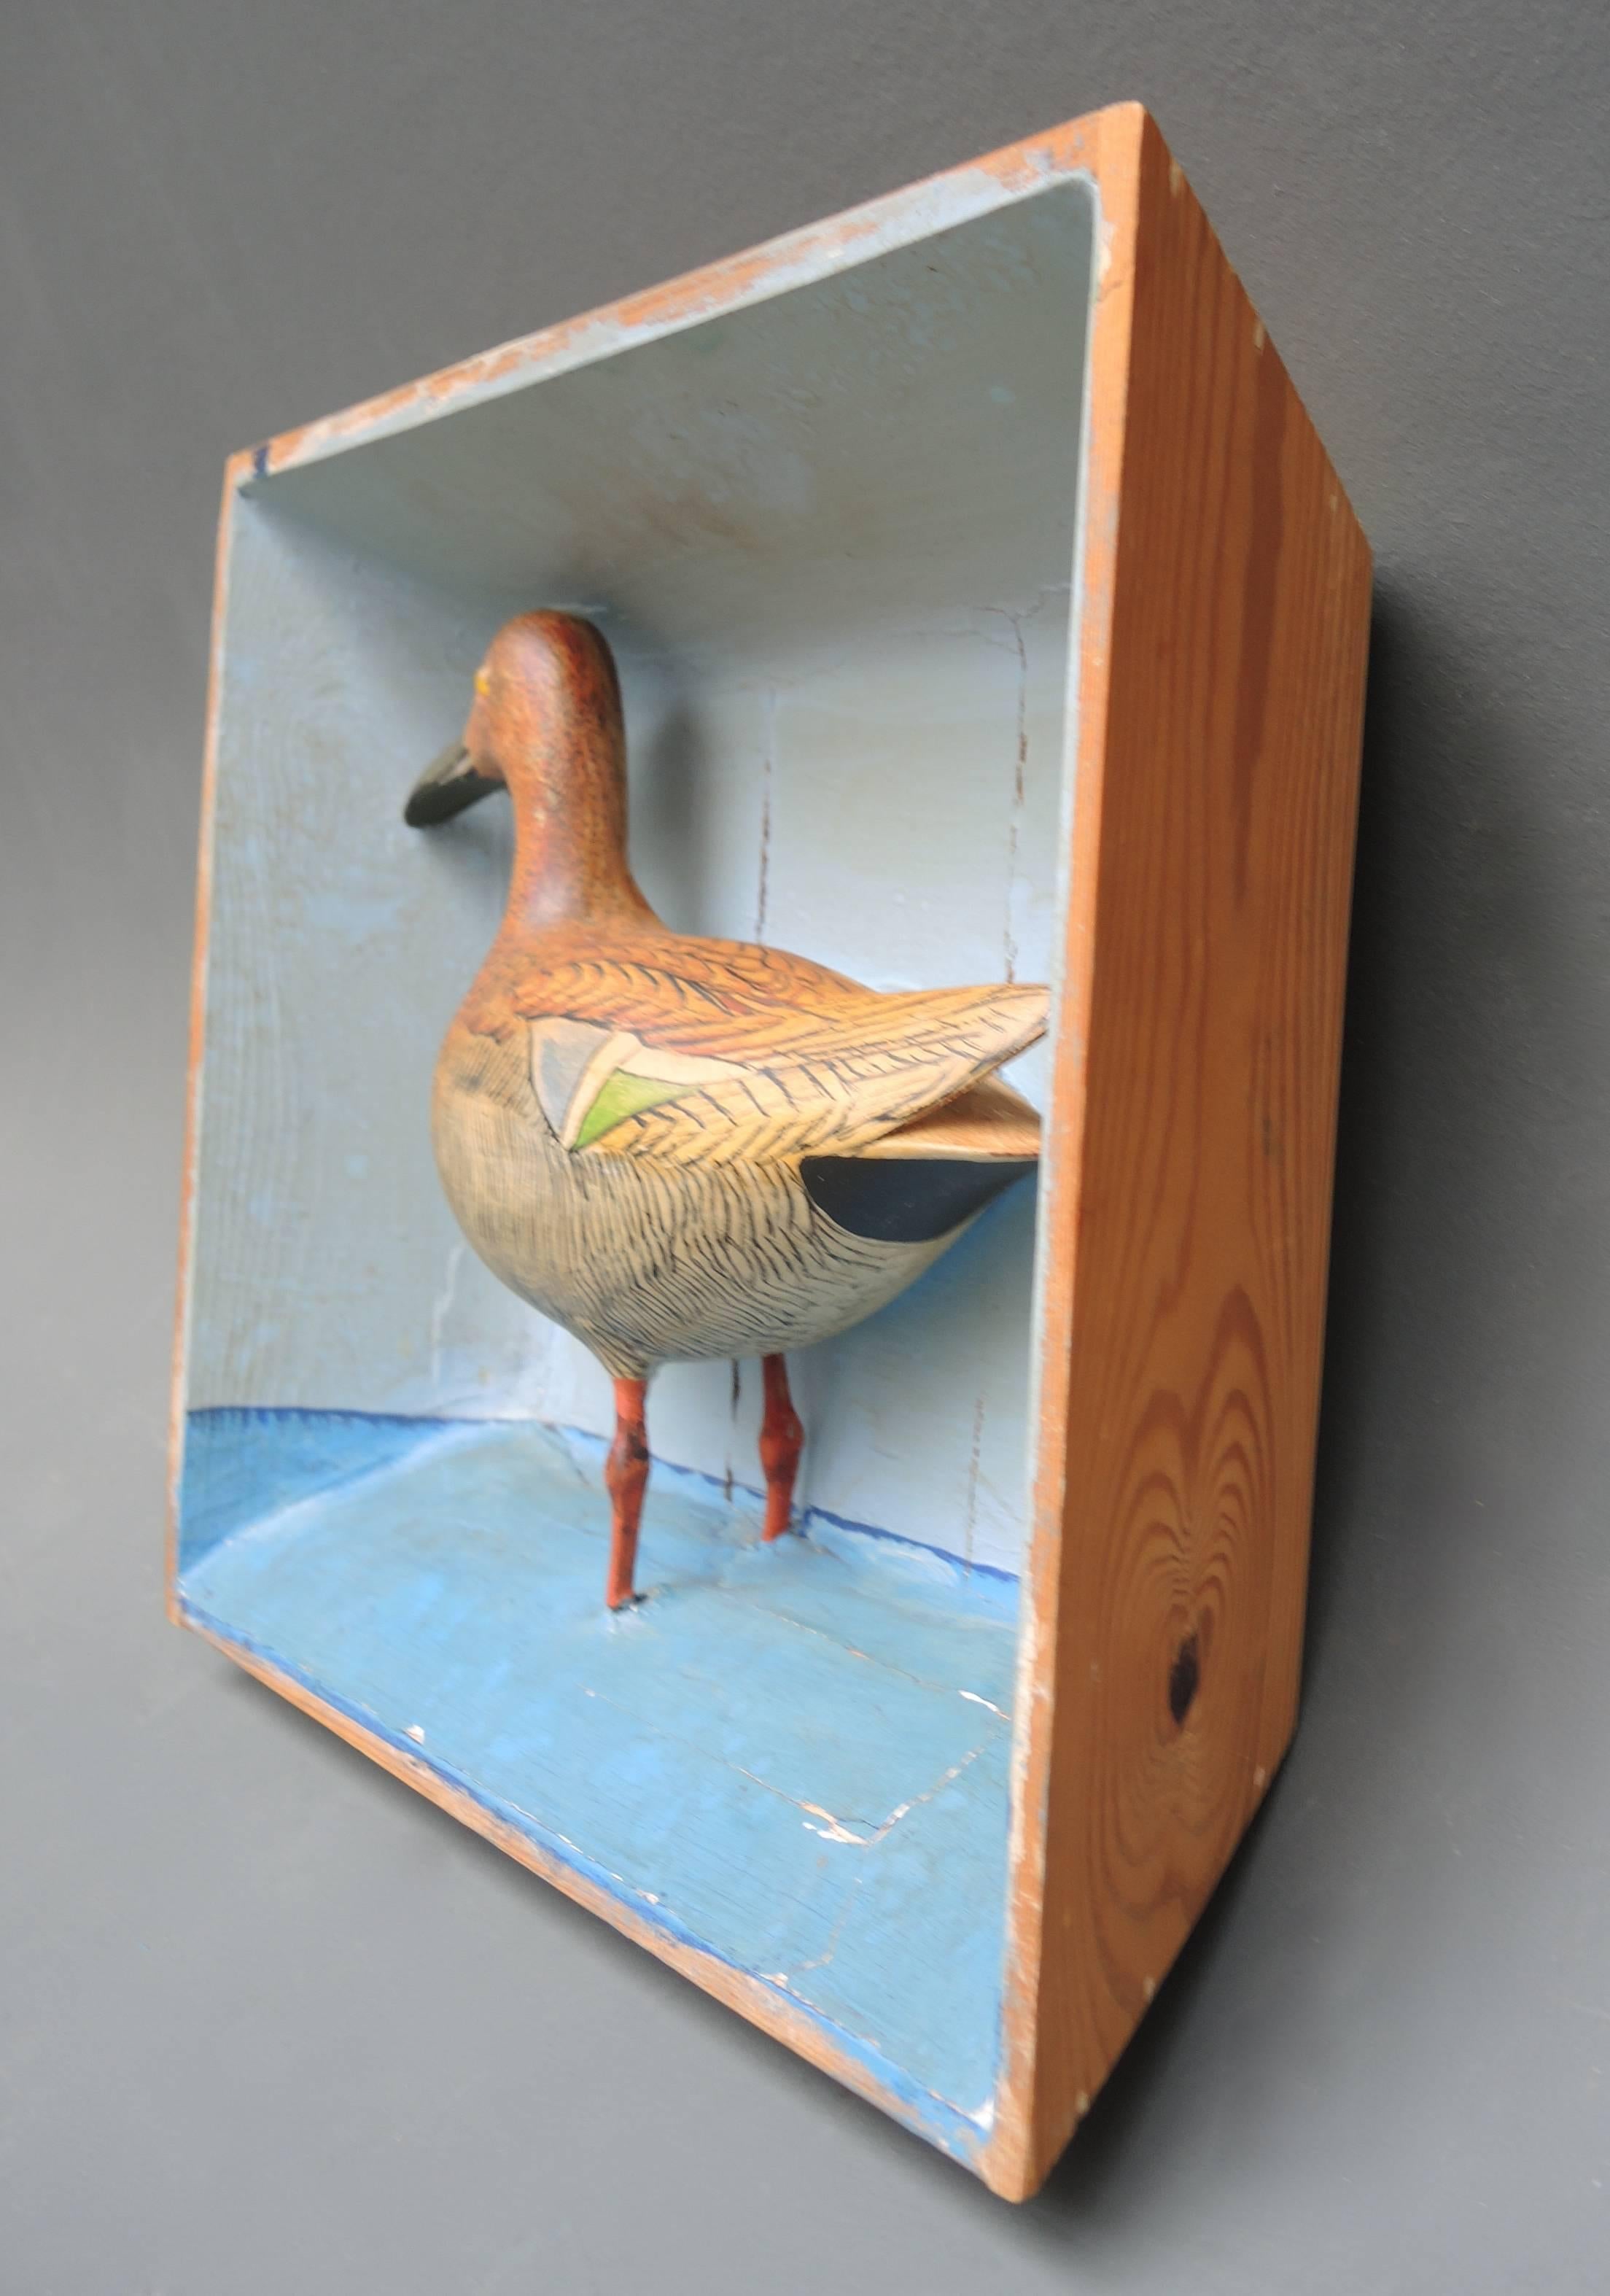 Folk Art Swedish Shadow Box Diorama with a Hand Carved and Painted Wood Shore Bird